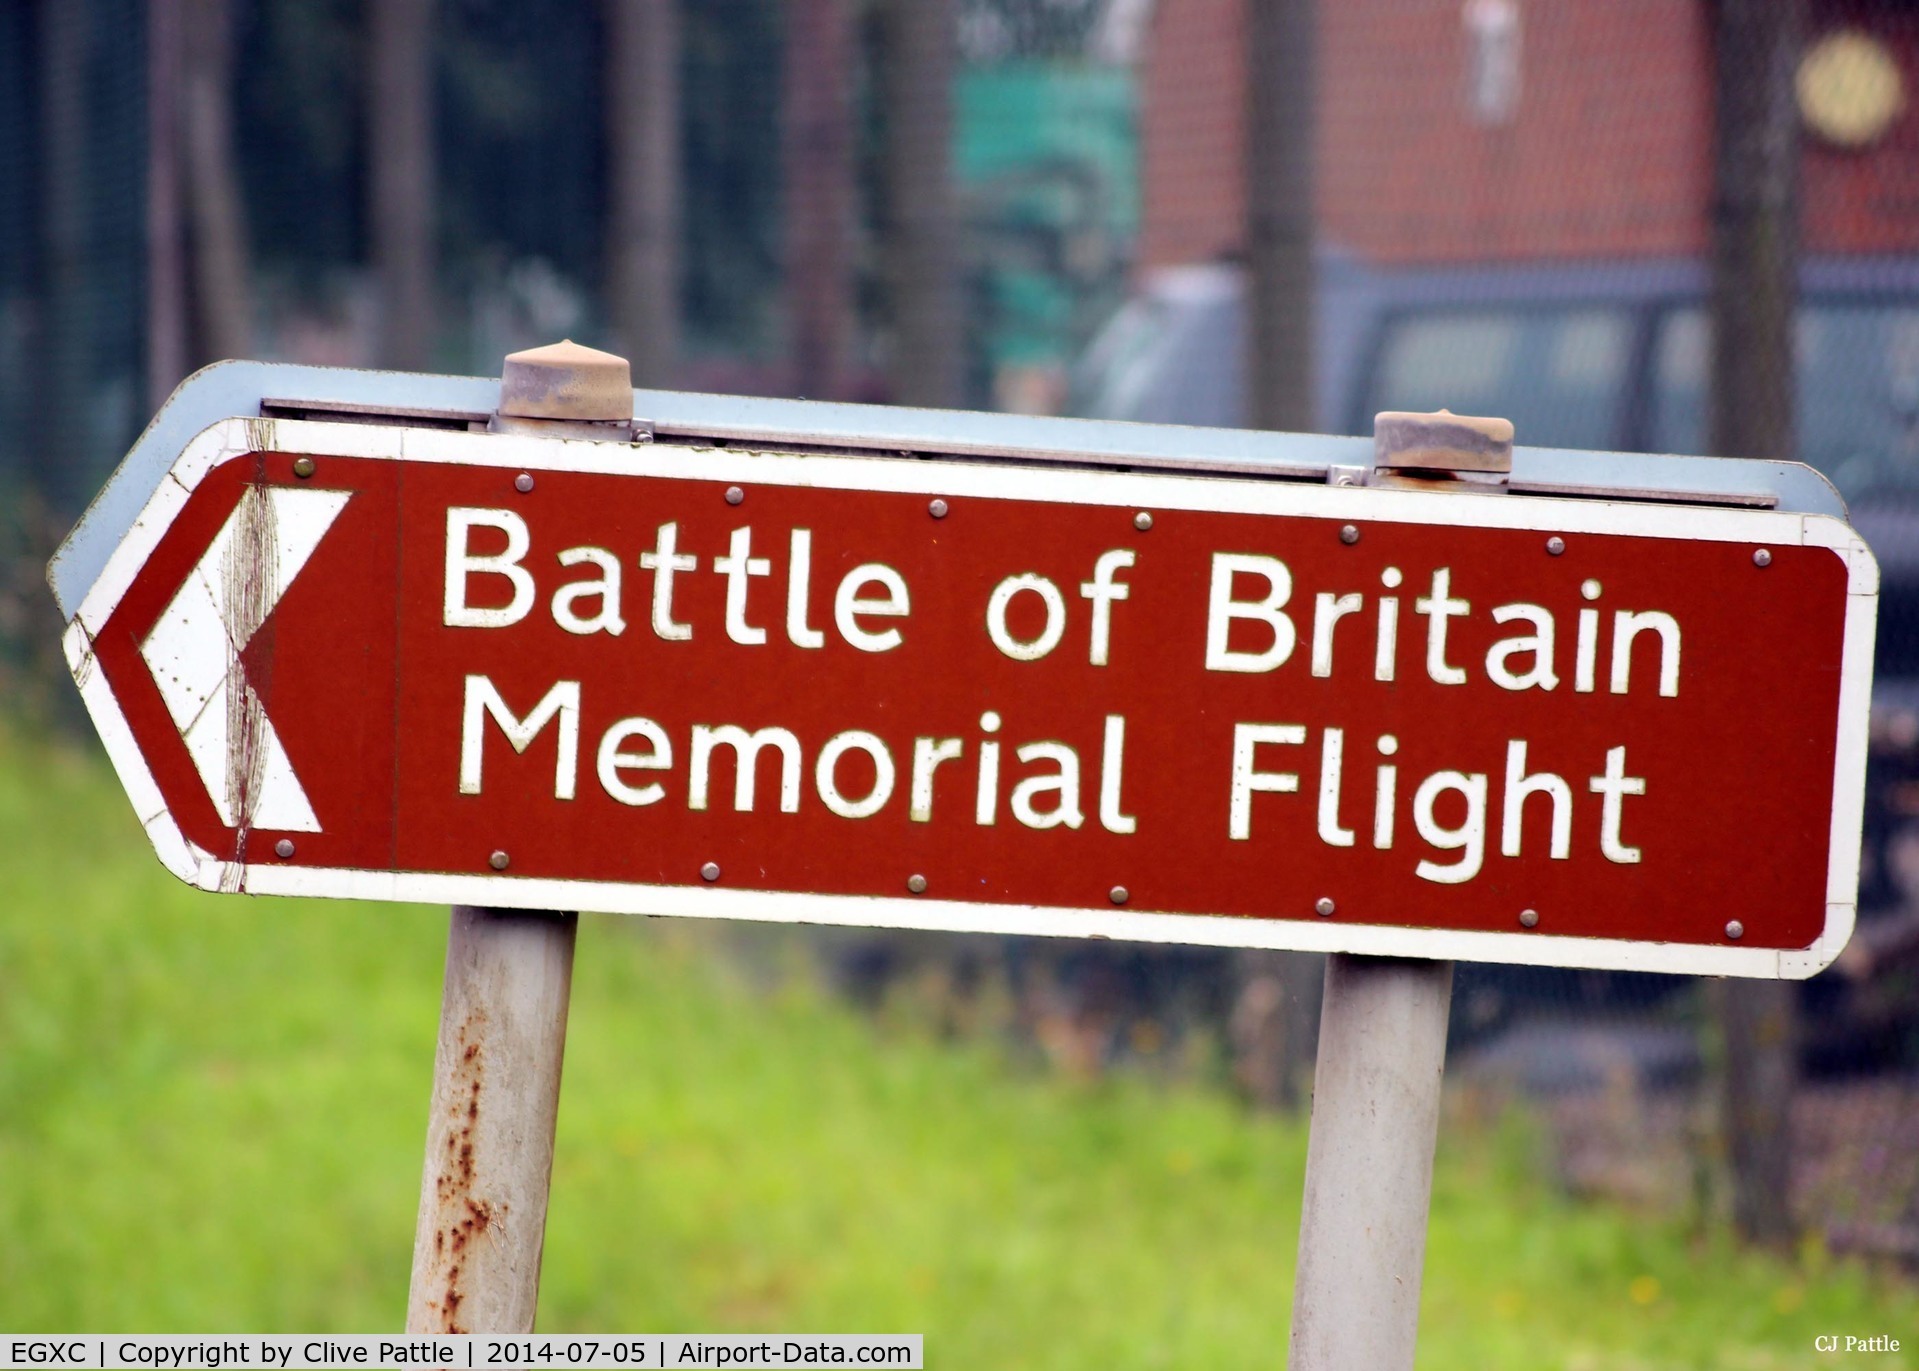 RAF Coningsby Airport, Coningsby, England United Kingdom (EGXC) - A view of the Battle of Britain Memorial Flight (BBMF) street sign at RAF Coningsby